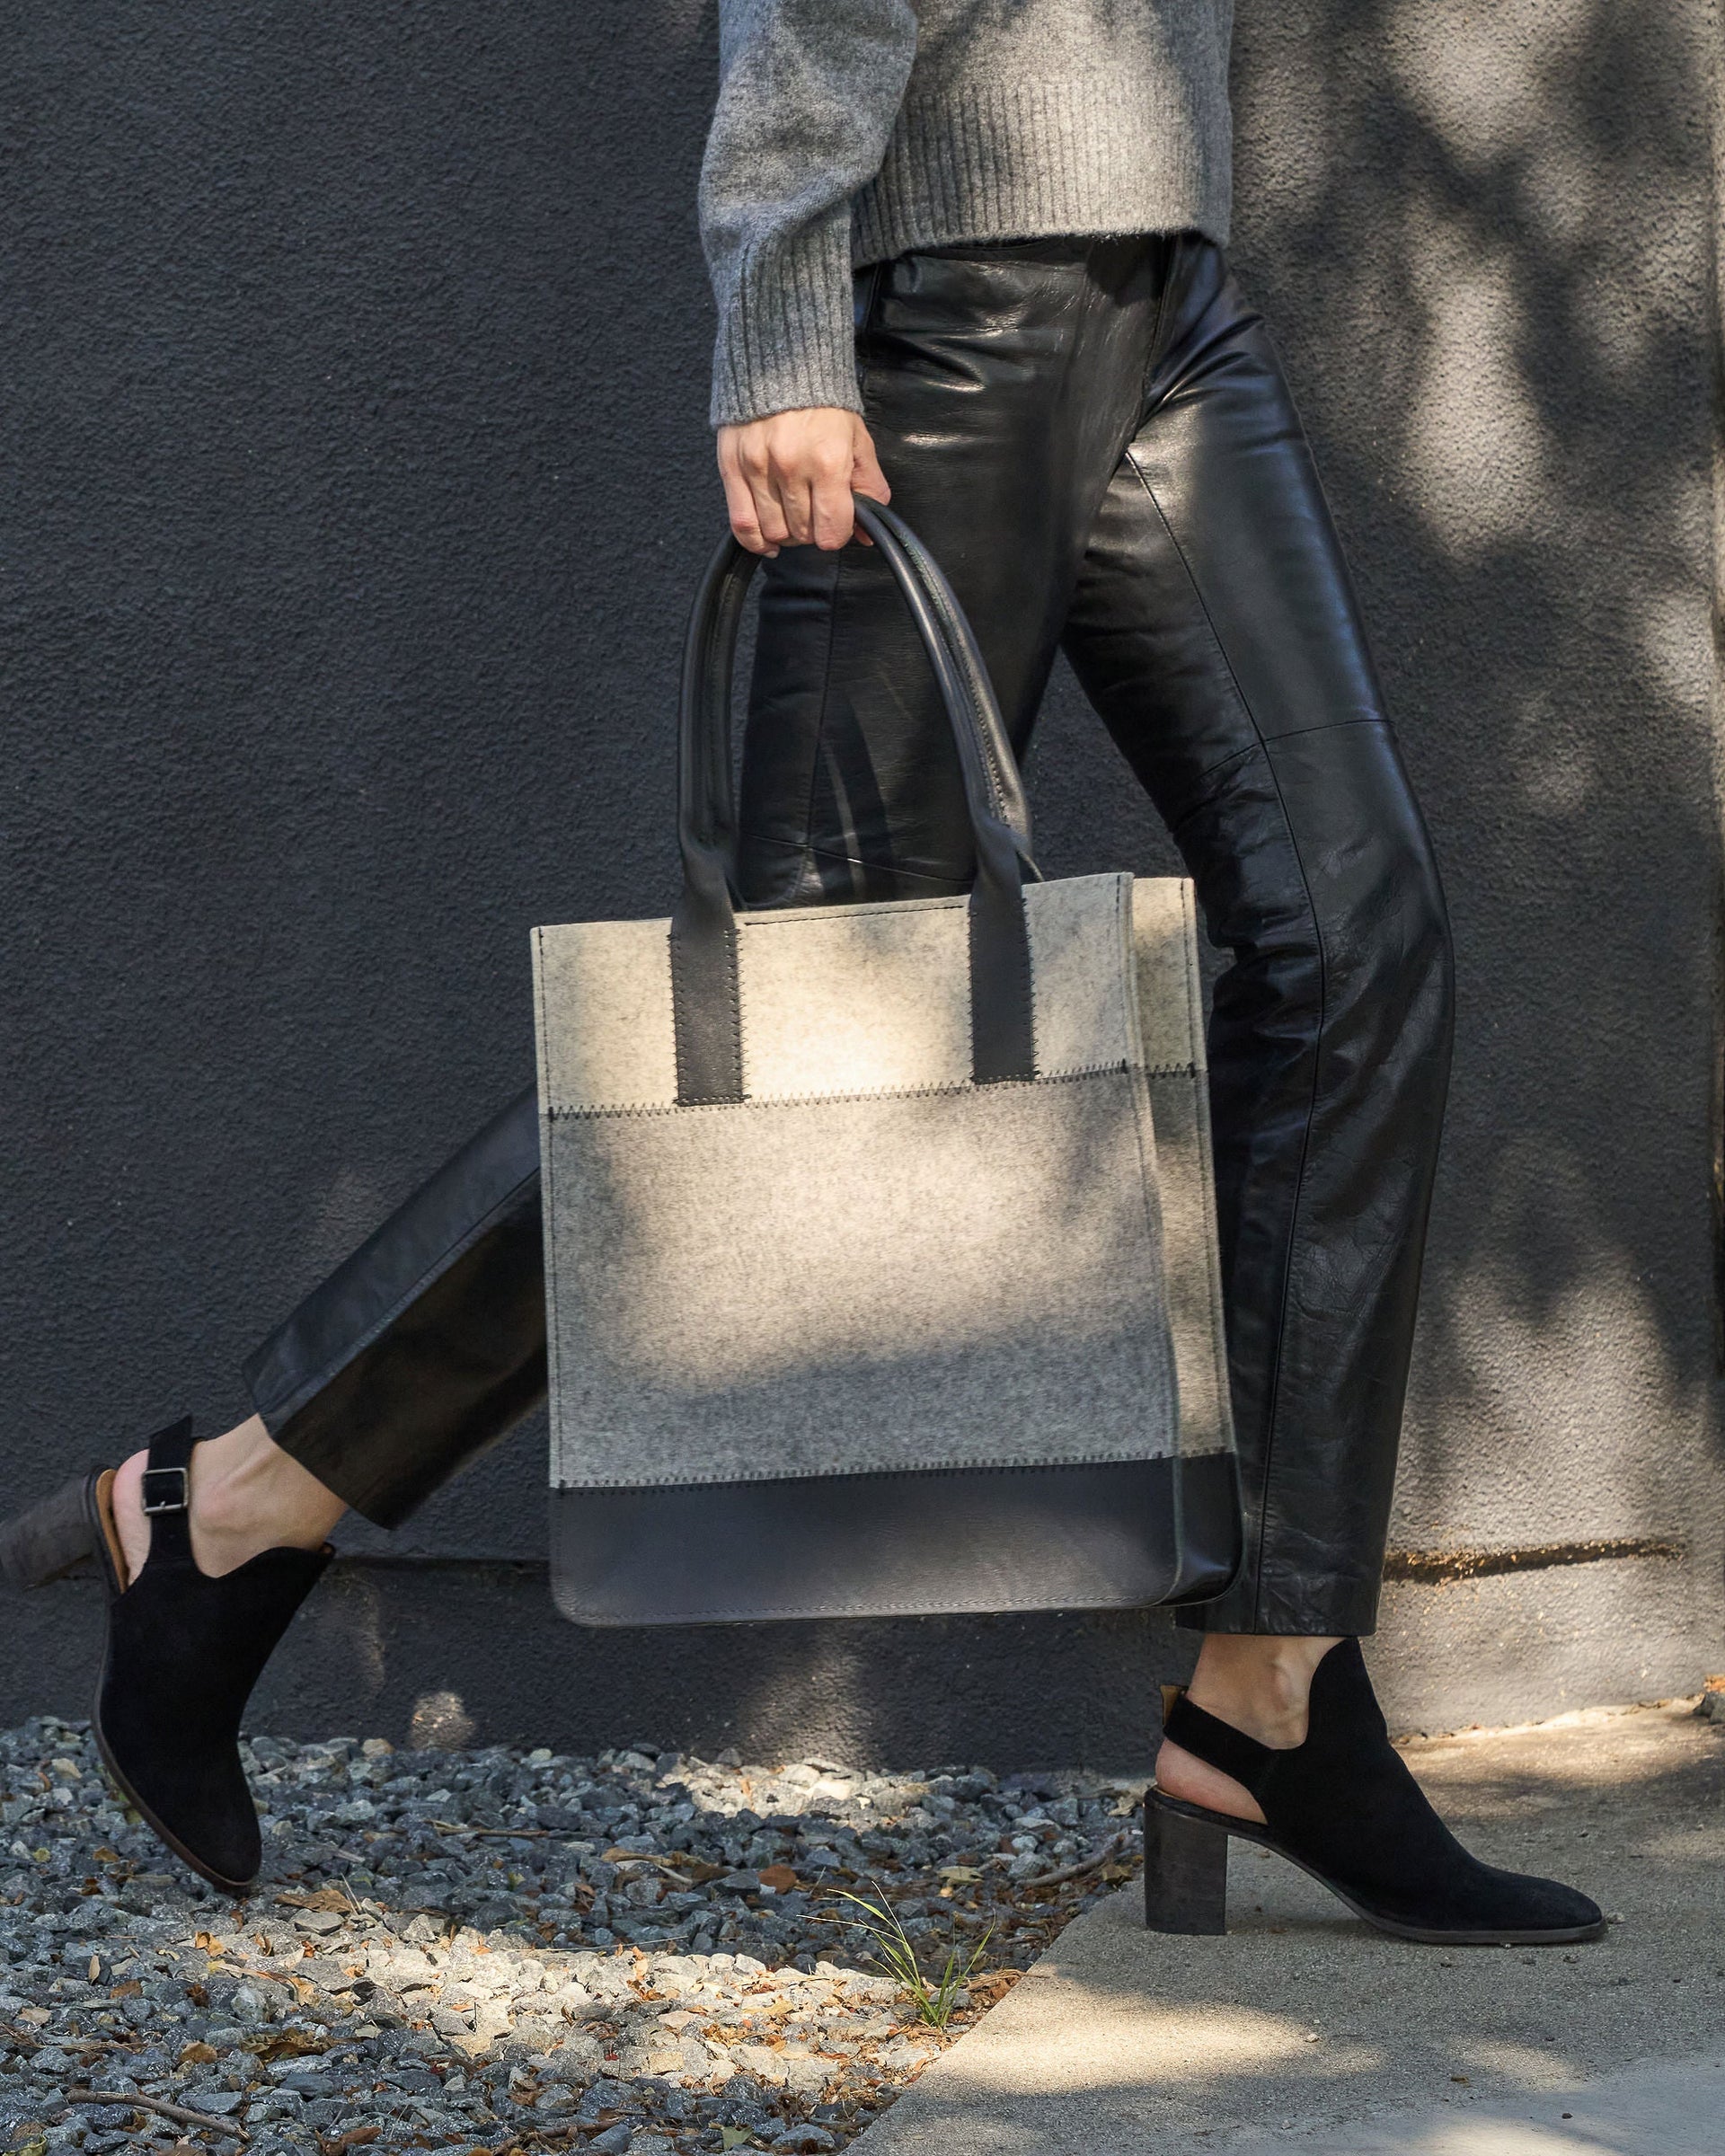 A dark grey, white, and black colored Jaunt Merino Wool Felt Tote bag is elegantly held by its top handle as a woman walks, showcasing its chic design